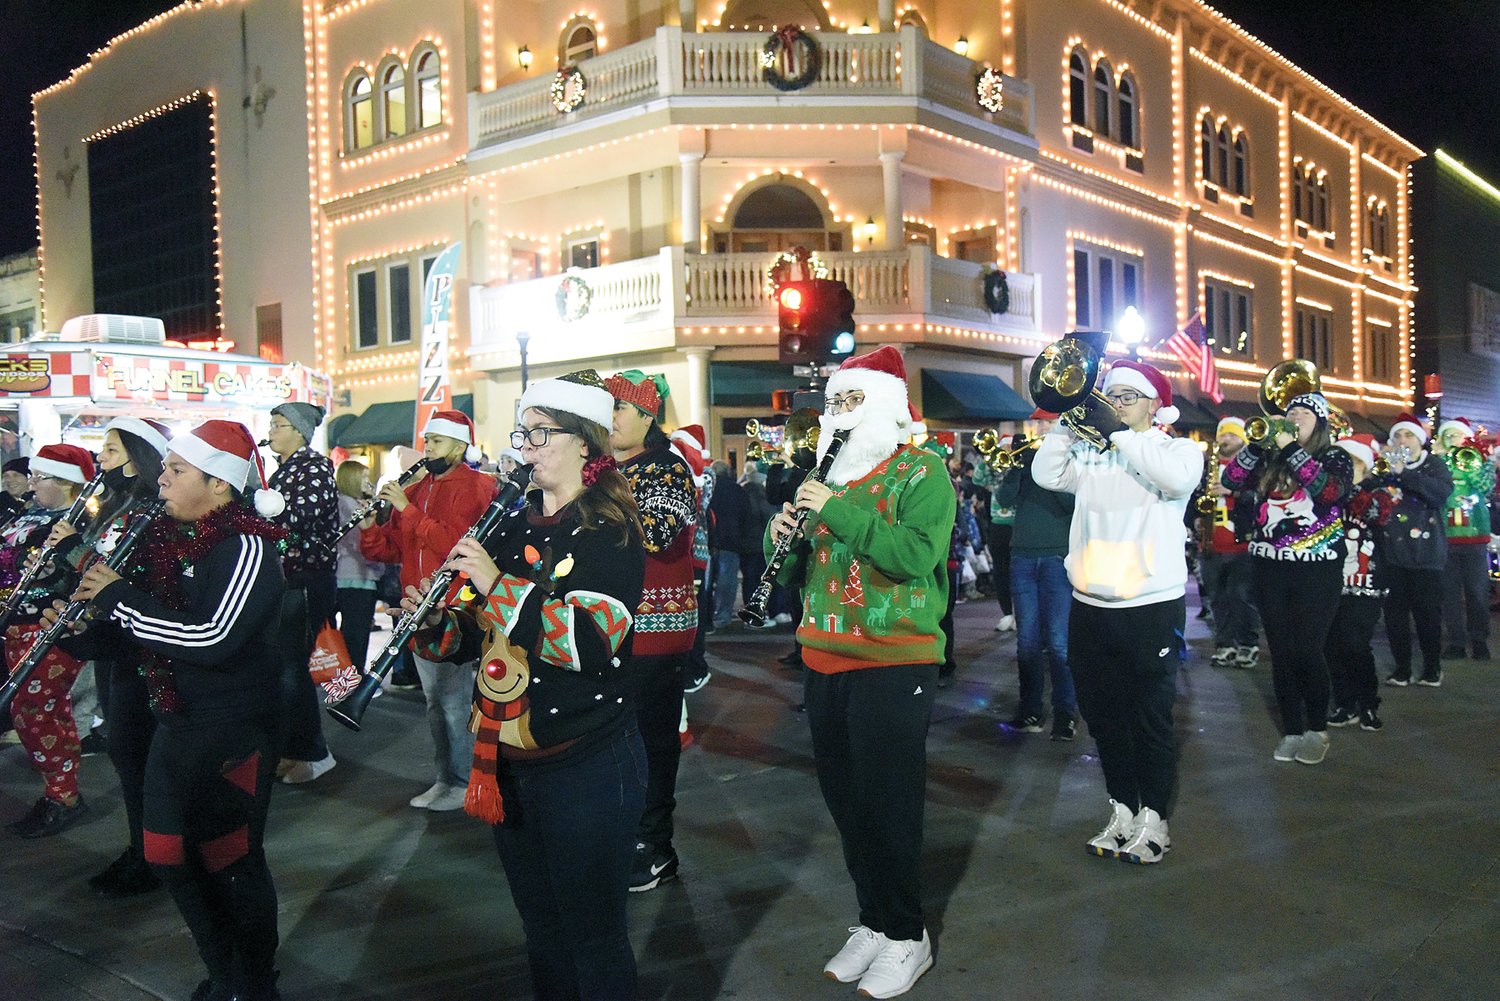 Smith-Cotton High School Marching Tigers dressed up in Christmas attire for the annual Christmas Parade Saturday evening in downtown Sedalia. In the Band category, Green Ridge Marching Tigers took first place and Smithton Marching Tiger received an Honorable Mention.